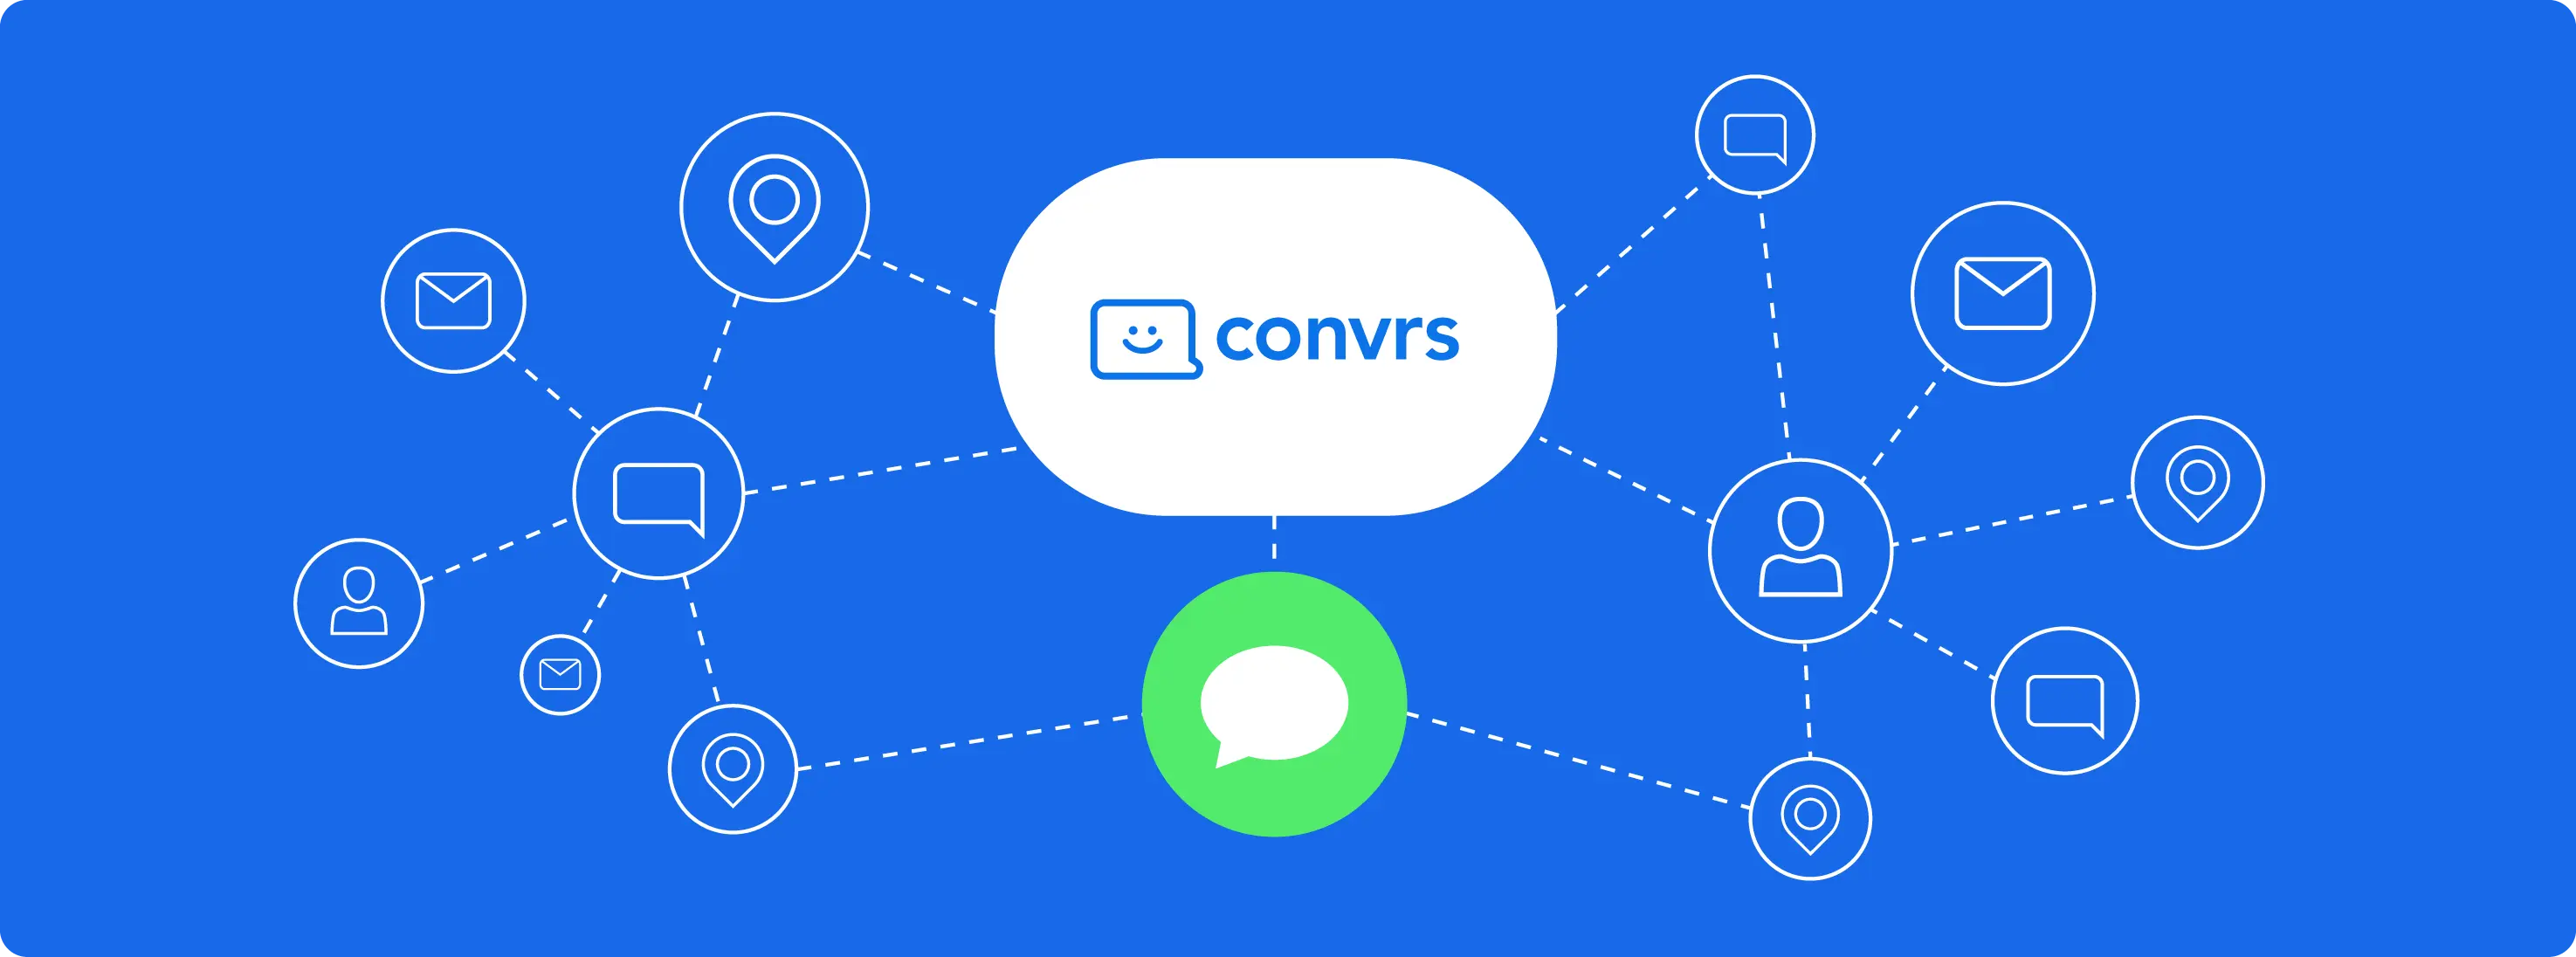 Connecting people to business by SMS messaging